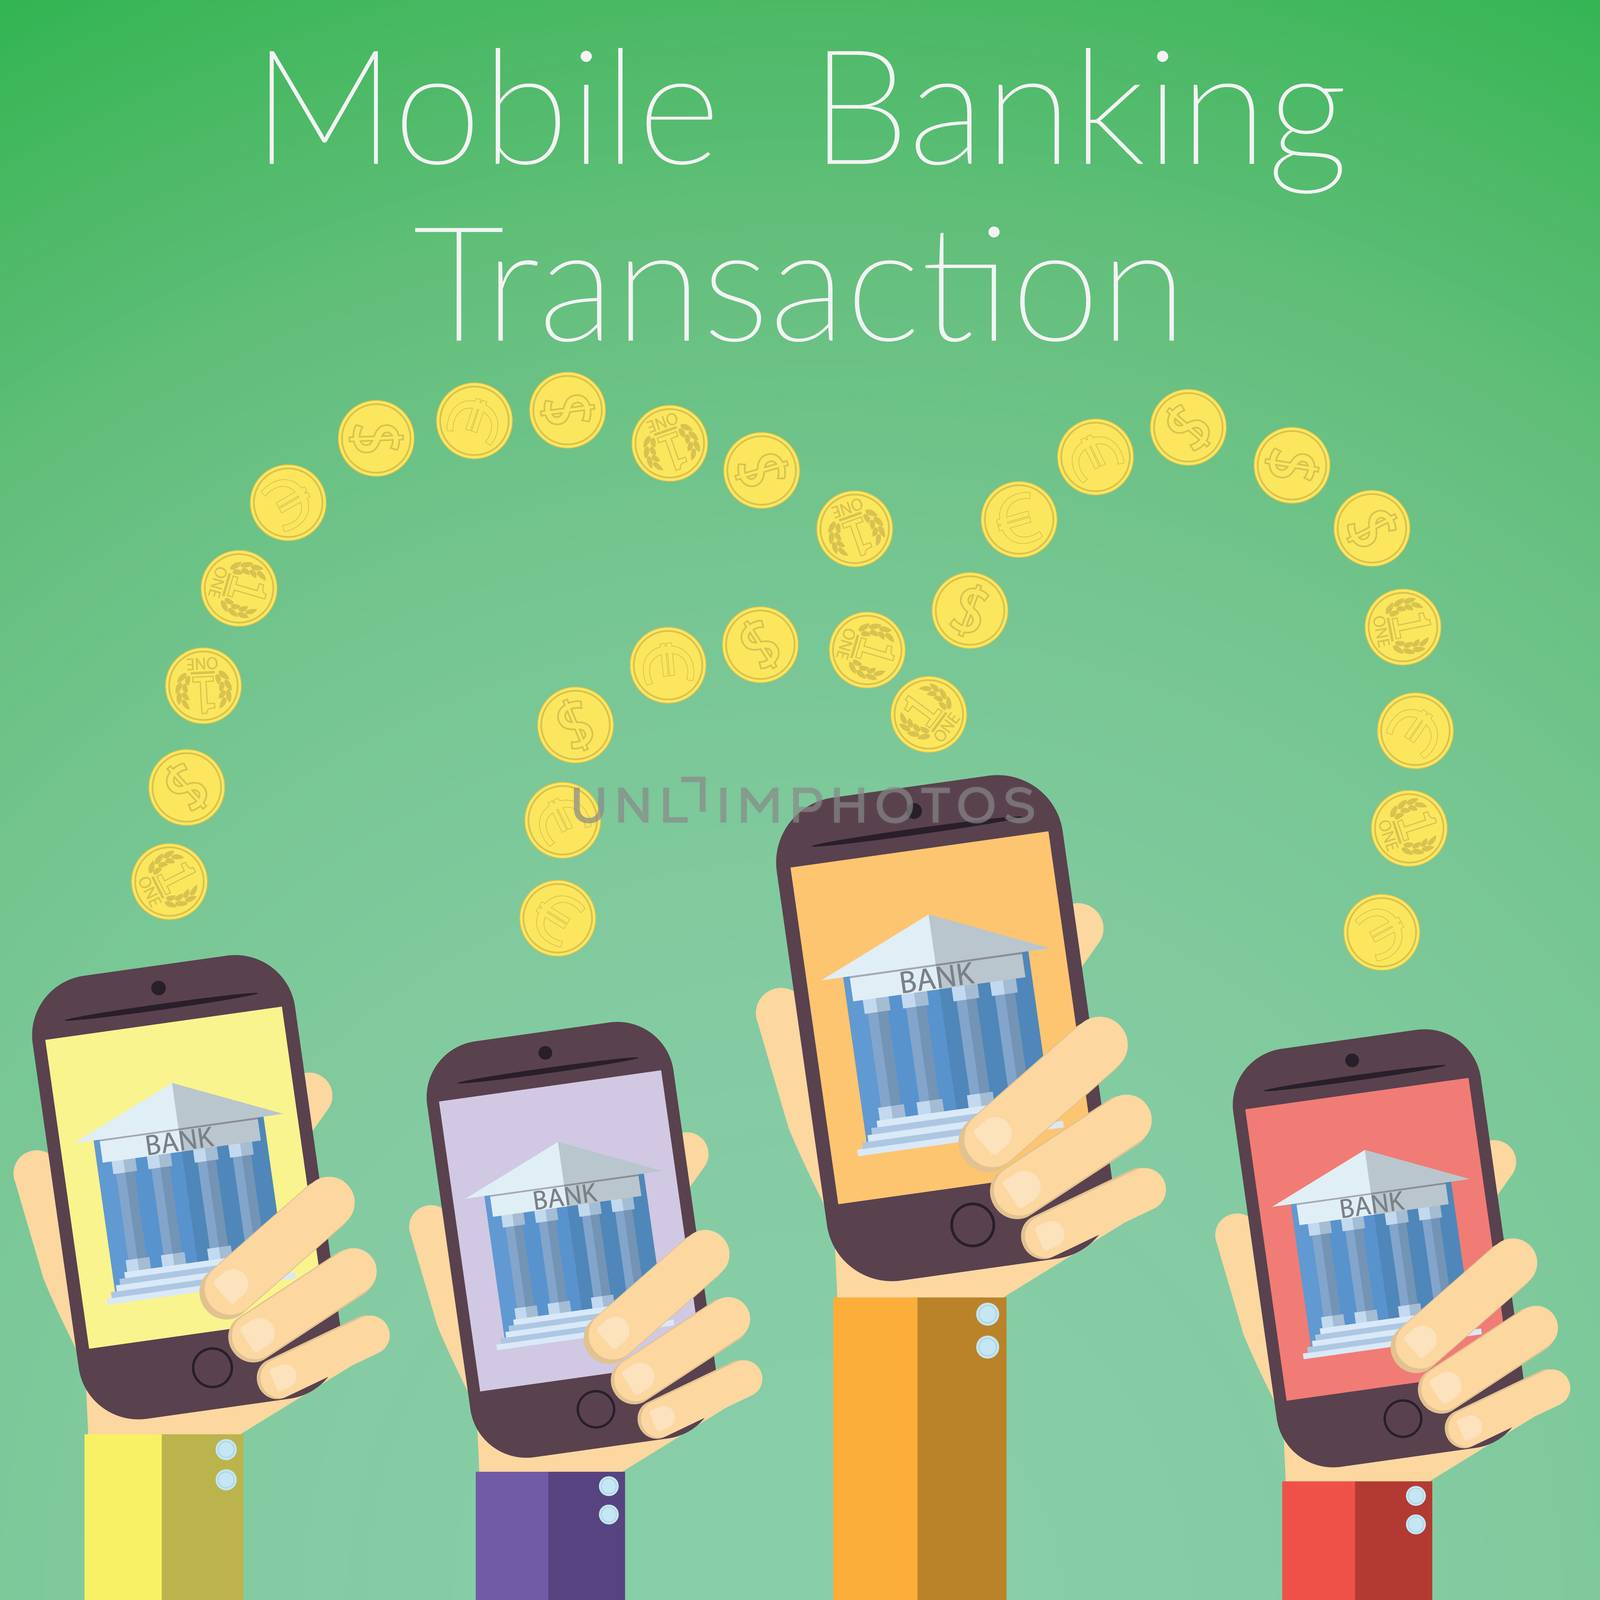 Flat design vector illustration of hands holding smart phones with bank icon. Concept for online banking transaction, on color background.